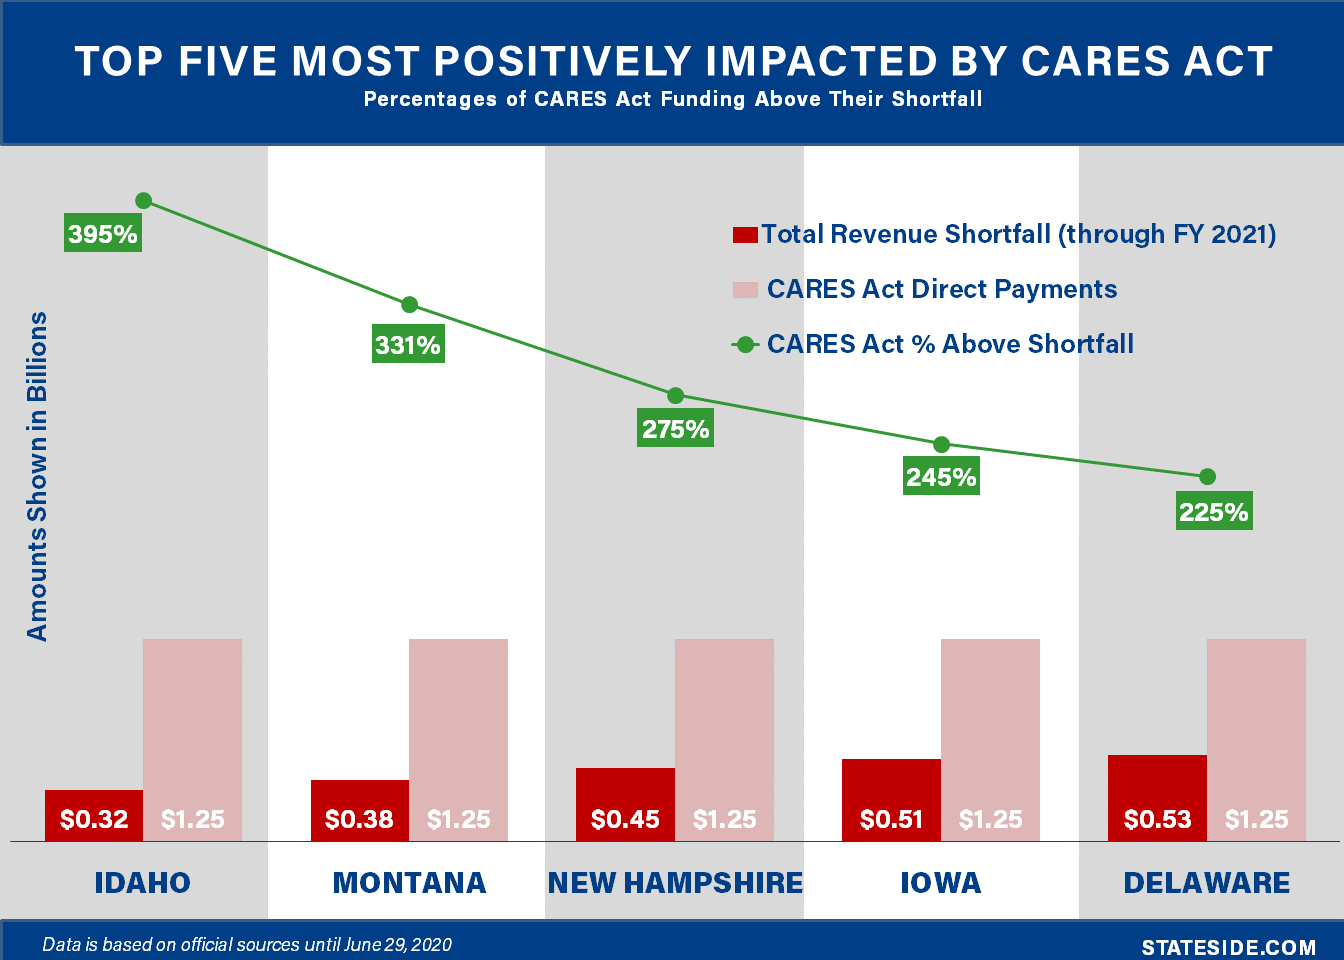 Top 5 States Most Positively Impacted by CARES Act